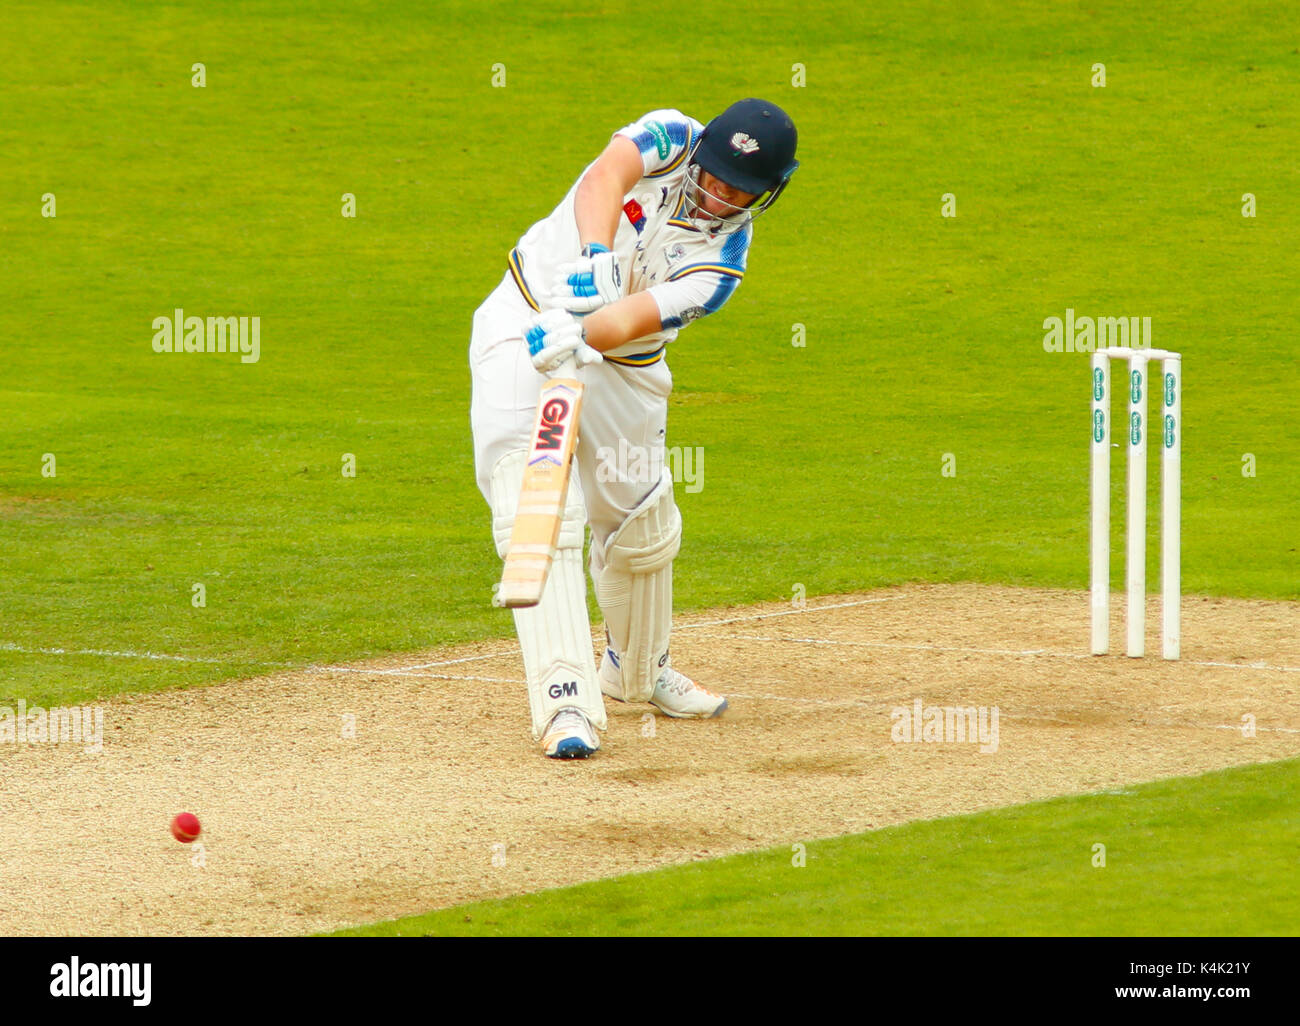 Leeds, UK. 6th Sep, 2017. Alex Lees batting for Yorkshire CCC vs Middlesex CCC during the Specsavers County Championship Match at Headingley Carneige Stadium, Leeds.  06/09/2017 Credit: Stephen Gaunt/Alamy Live News Stock Photo